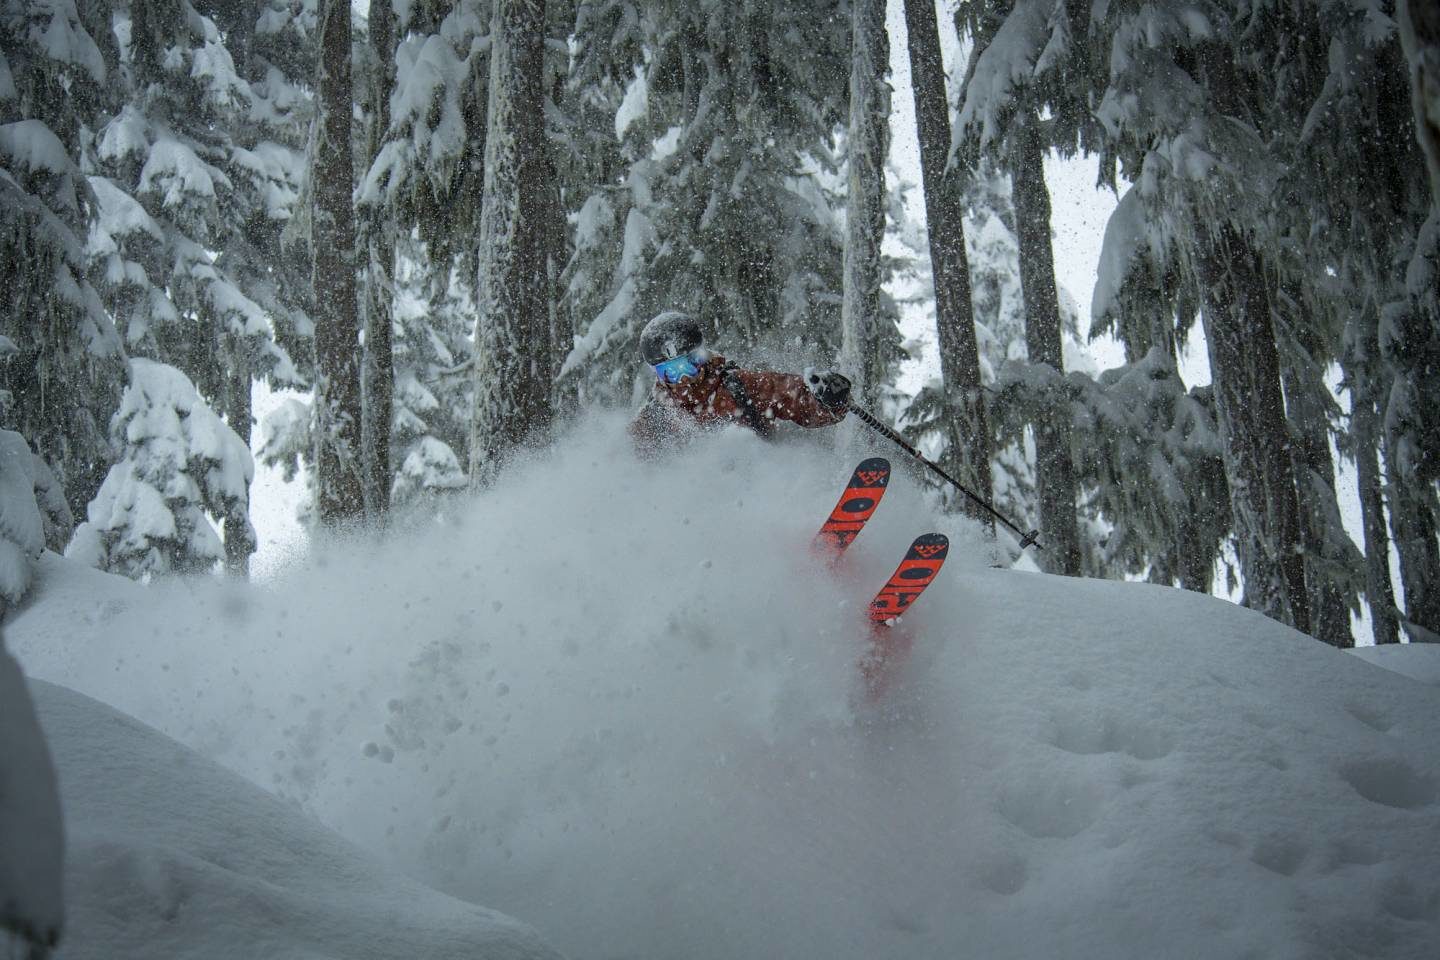 Athlete Mark Abma, captured on Whistler, after the early January snowfall.